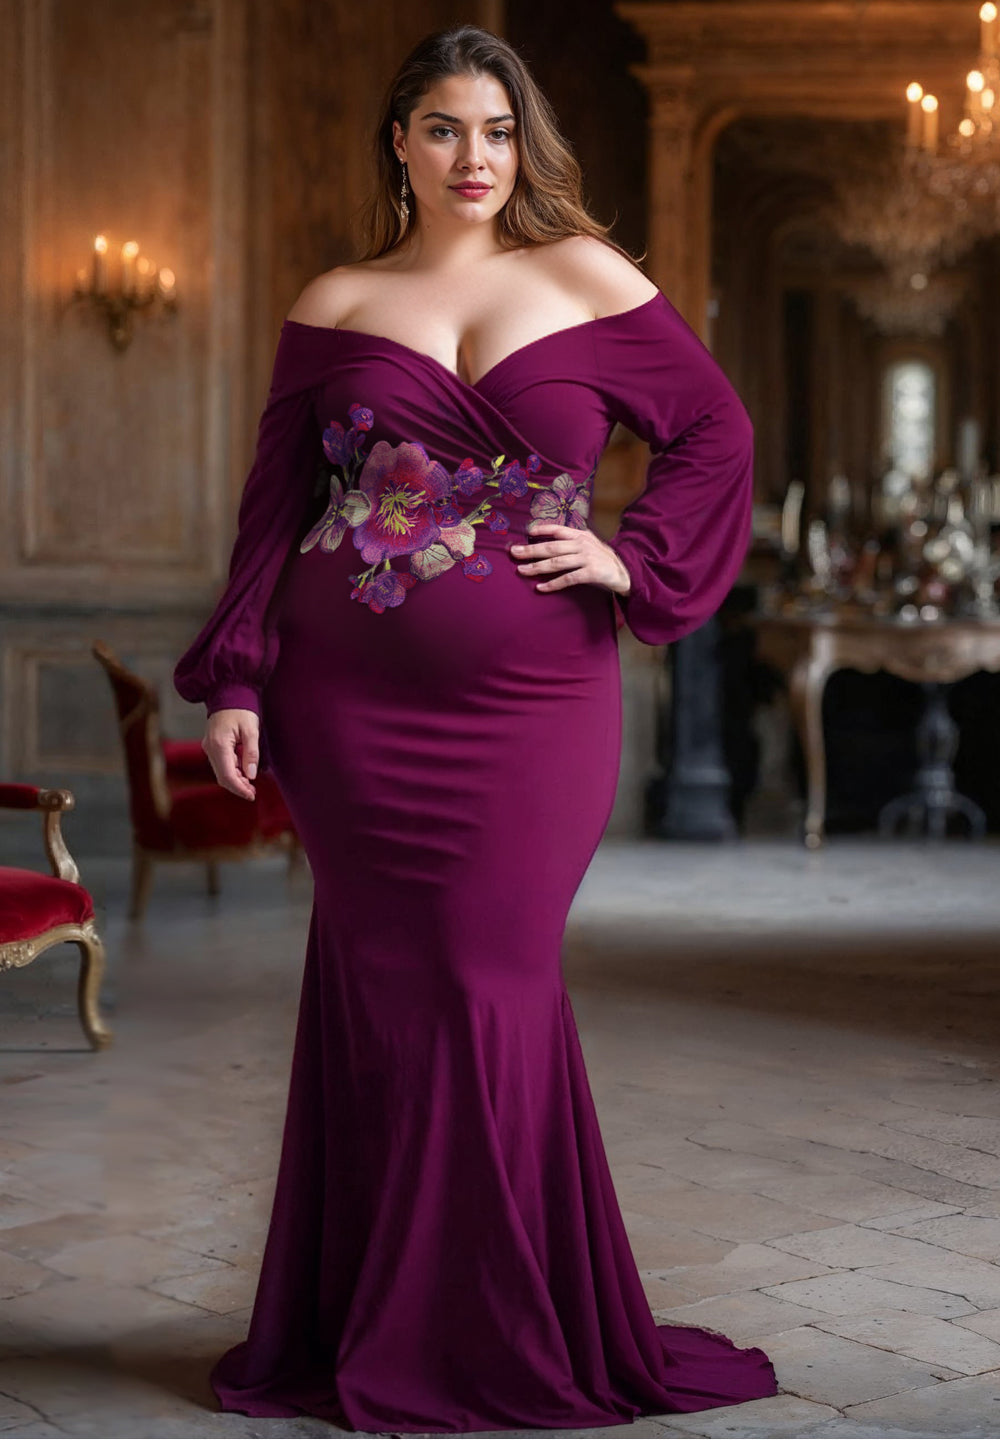 Alexandra Plus Size Dress (Made To Order)